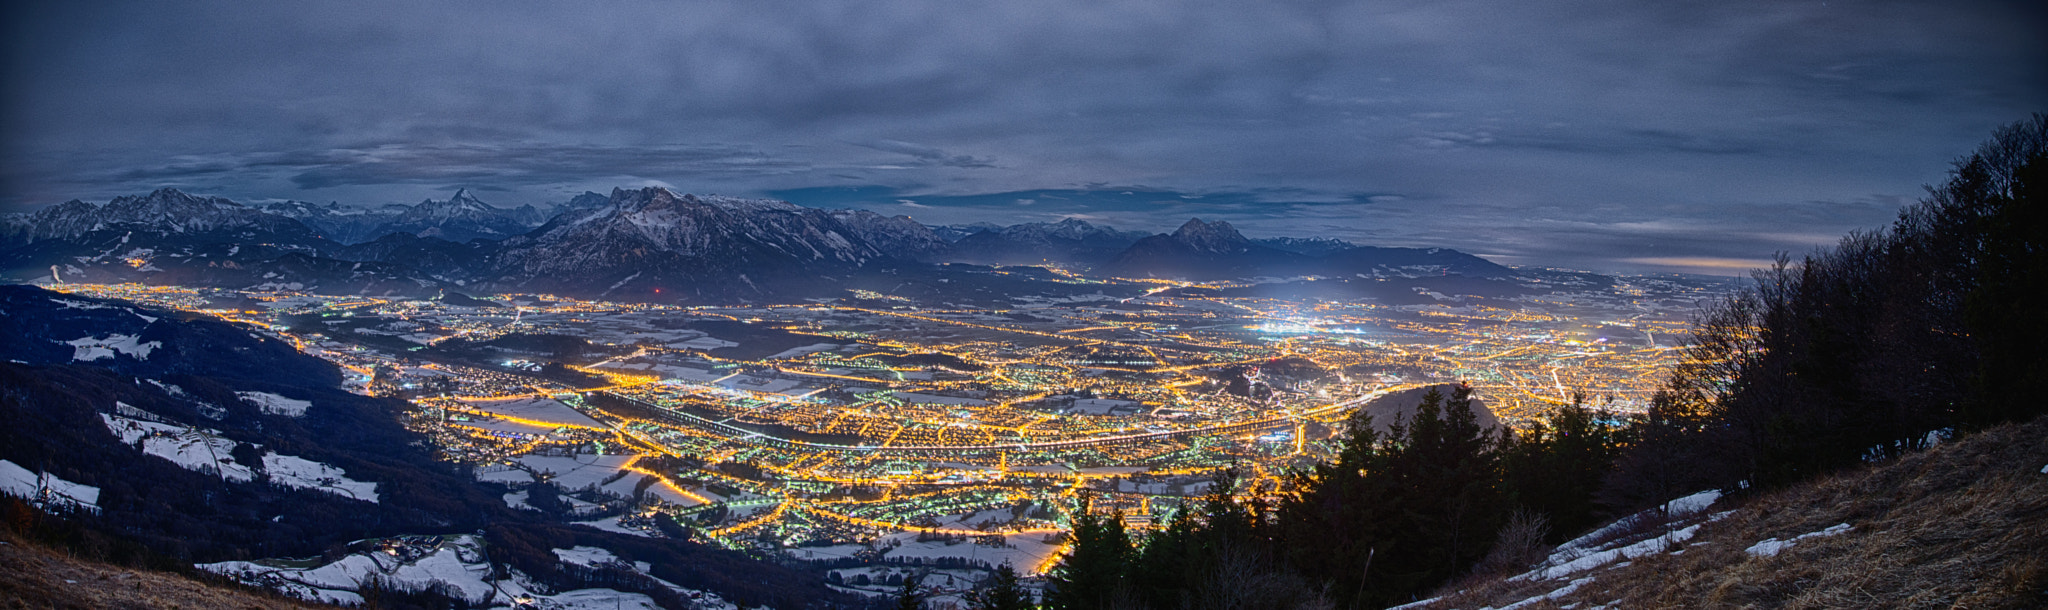 Nikon D800 + Sigma 24-105mm F4 DG OS HSM Art sample photo. View from the mountains over the city of salzburg autria at night photography